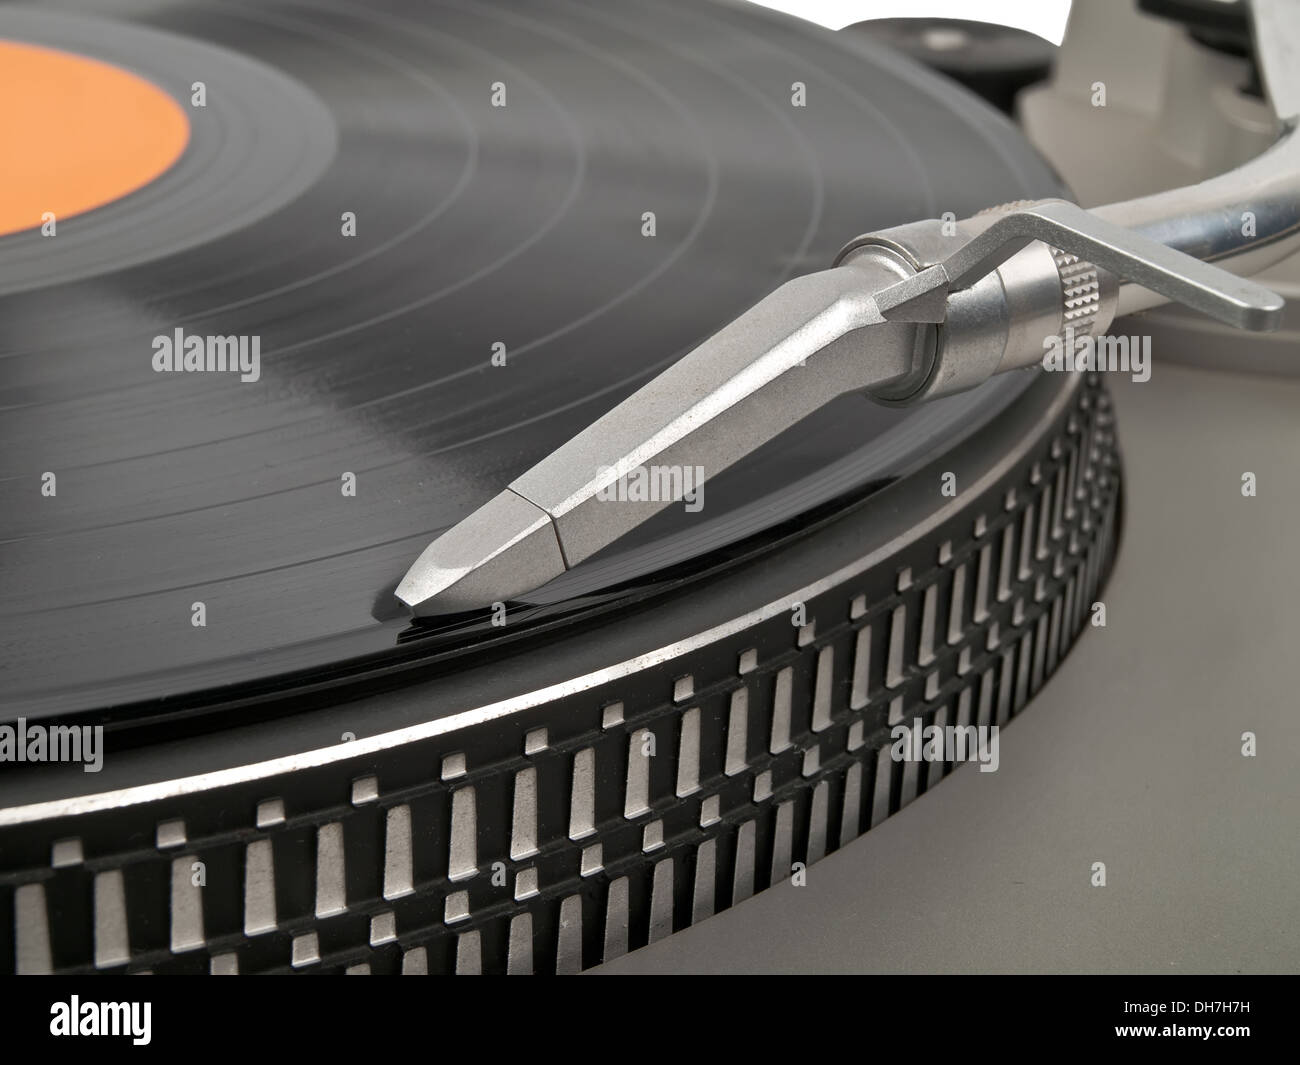 record playing on turntable and cartridge in front view Stock Photo